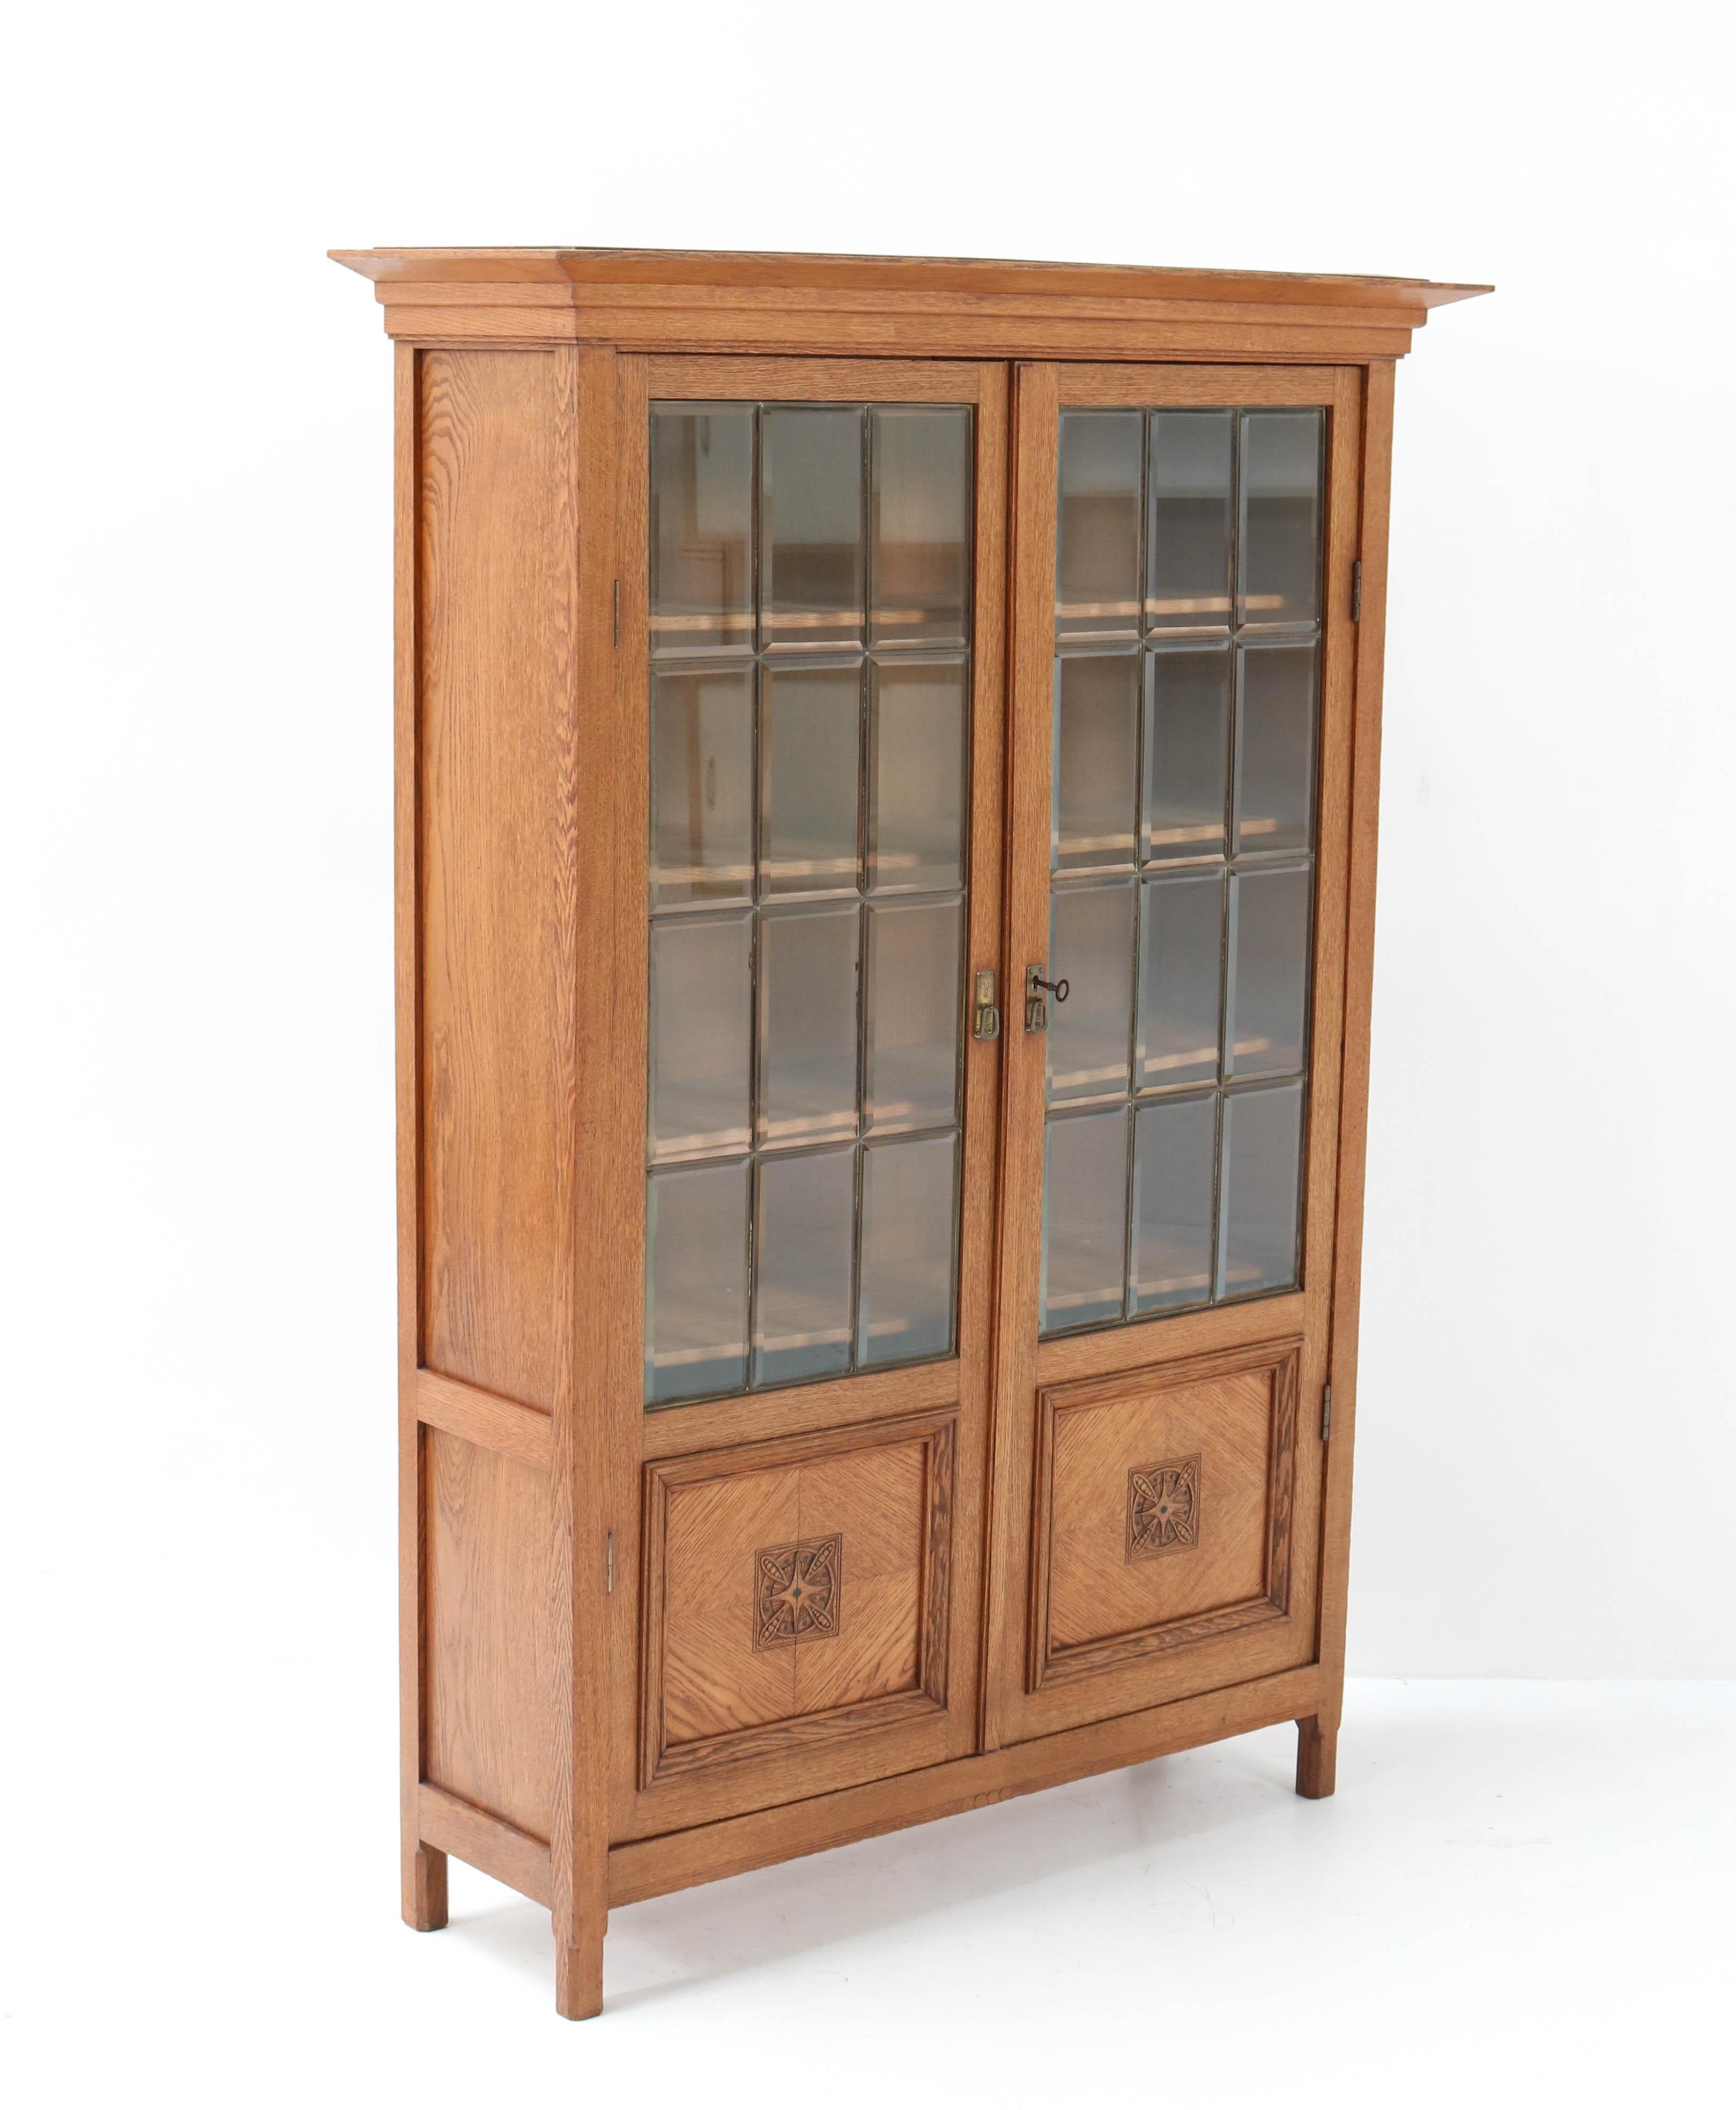 Wonderful and rare Art Nouveau Arts & Crafts bookcase.
Attributed to K.P.C. de Bazel.
Striking Dutch design from the 1900s.
Solid oak with original solid brass handles.
Original beveled glass with brass linings.
Four solid oak shelves